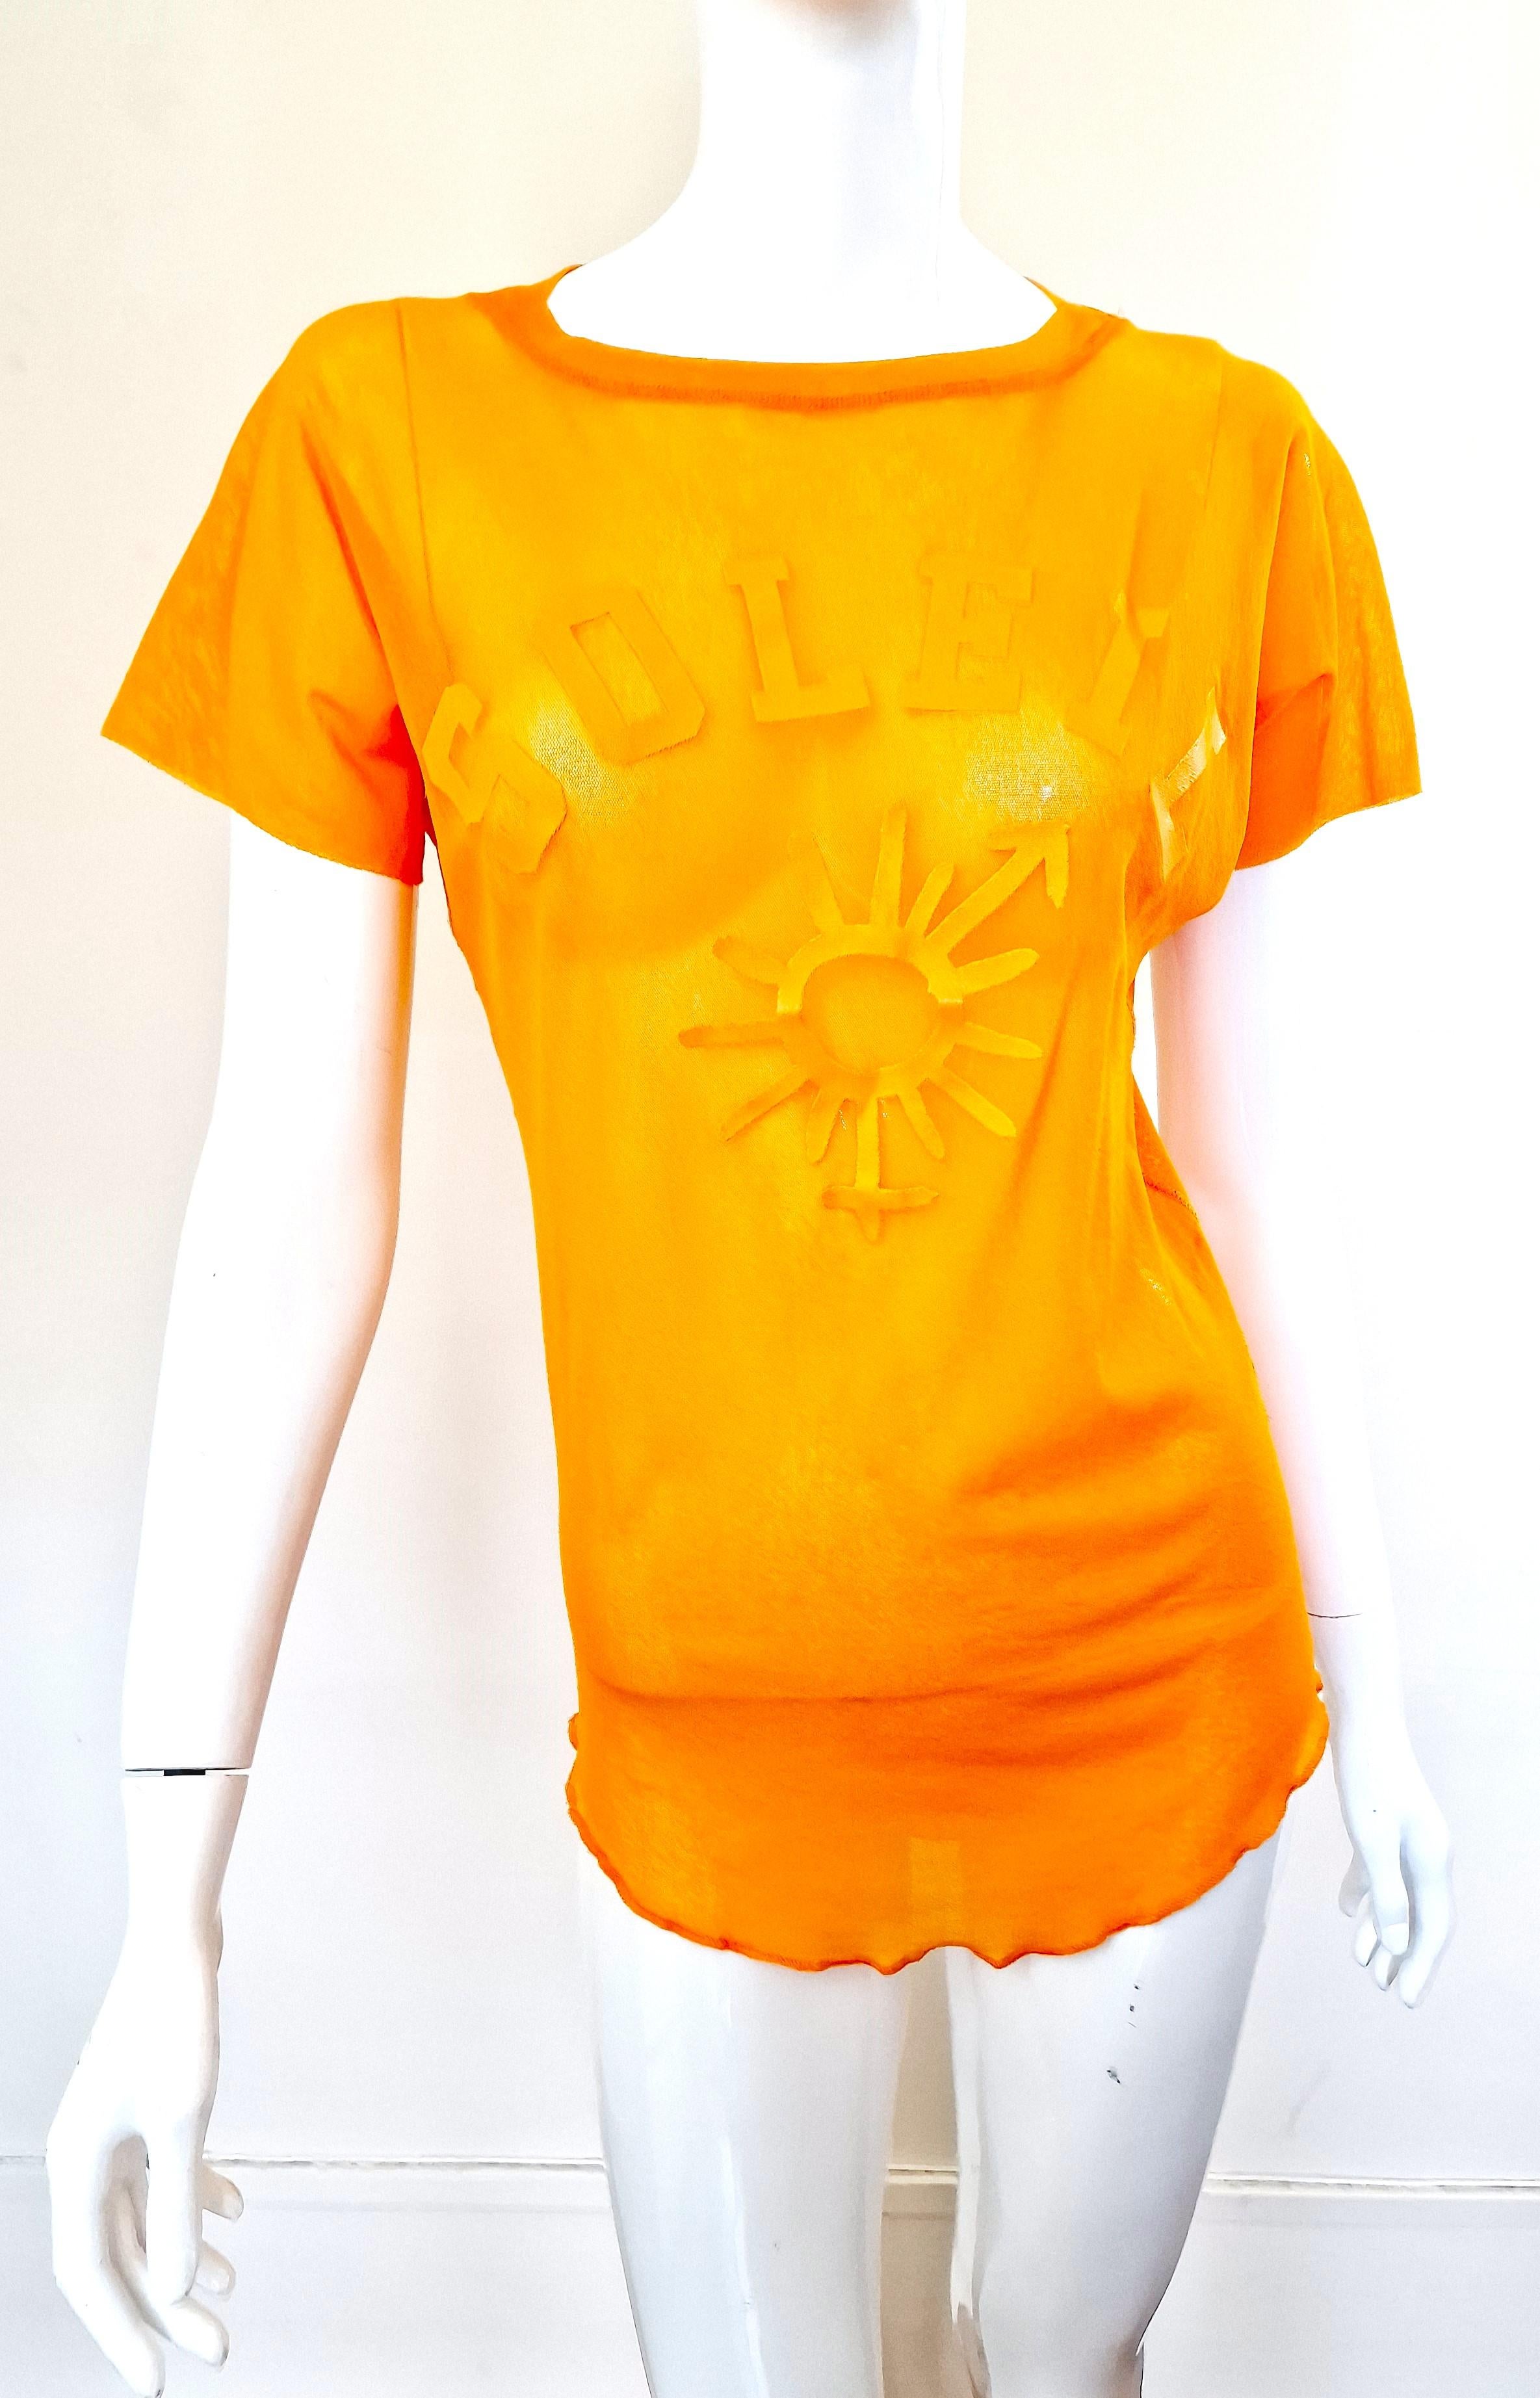 Symbol mesh top by Jean Paul Gaultier!
Big Soleil and Gaulter logo (Female and male symbol) on it!
Transparent.

EXCELLENT condition!

SIZE
Men:fits from medium to XL.
No size label. Extremly stretchy fabric.
Length: 63 cm / 24.8 inch
Bust: 52 cm /